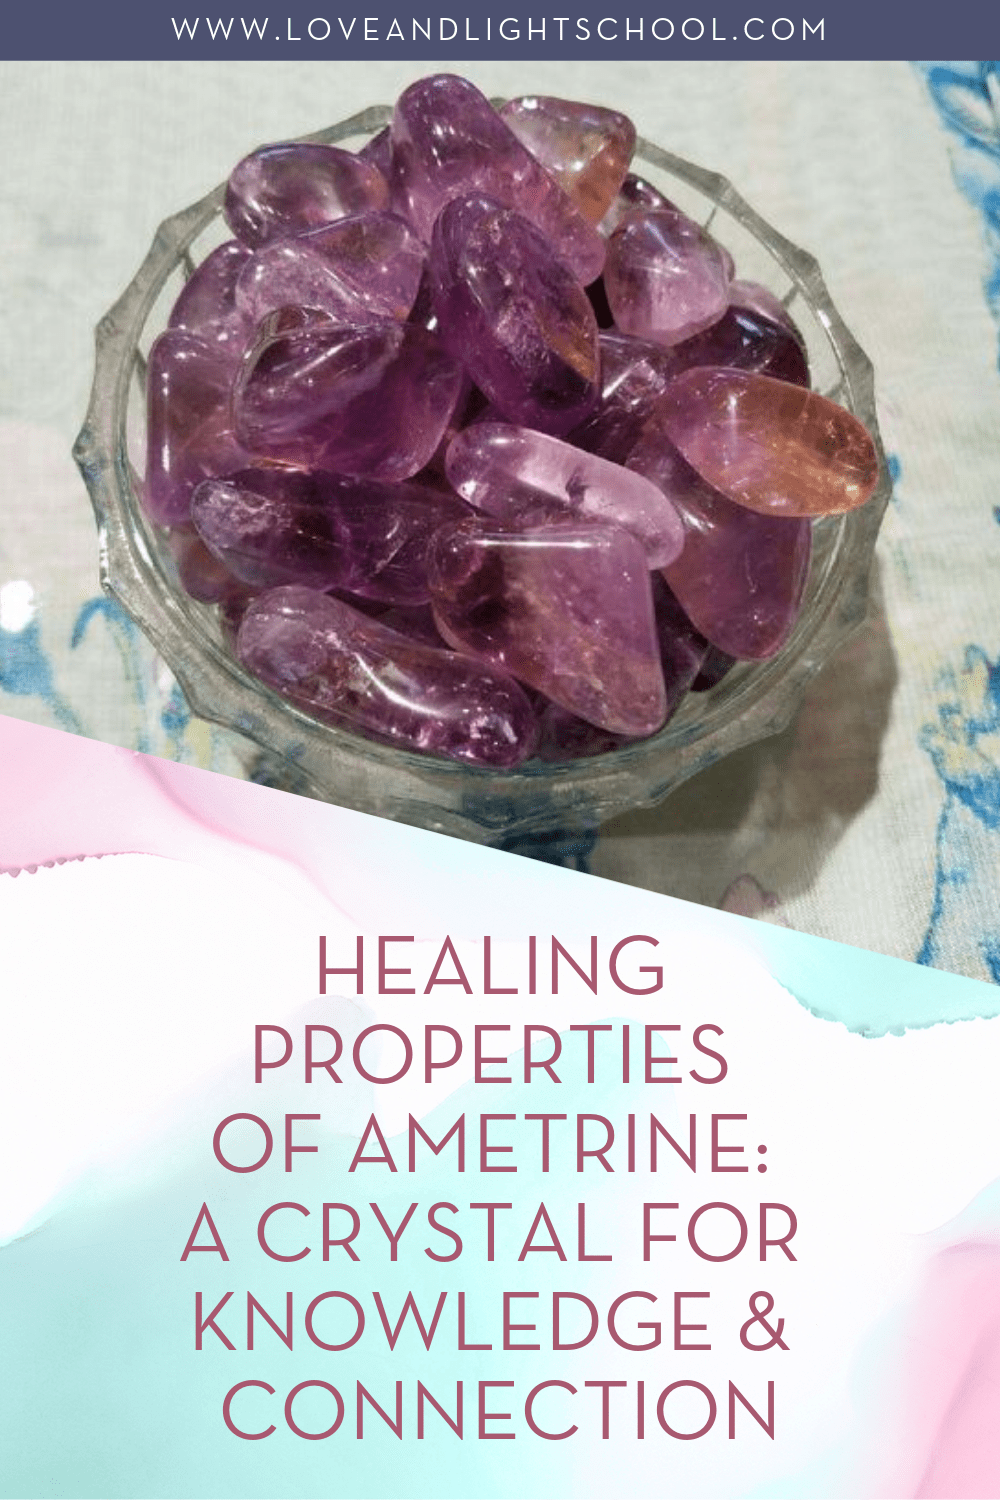 Healing Properties of Ametrine: A Crystal for Knowledge & Connection